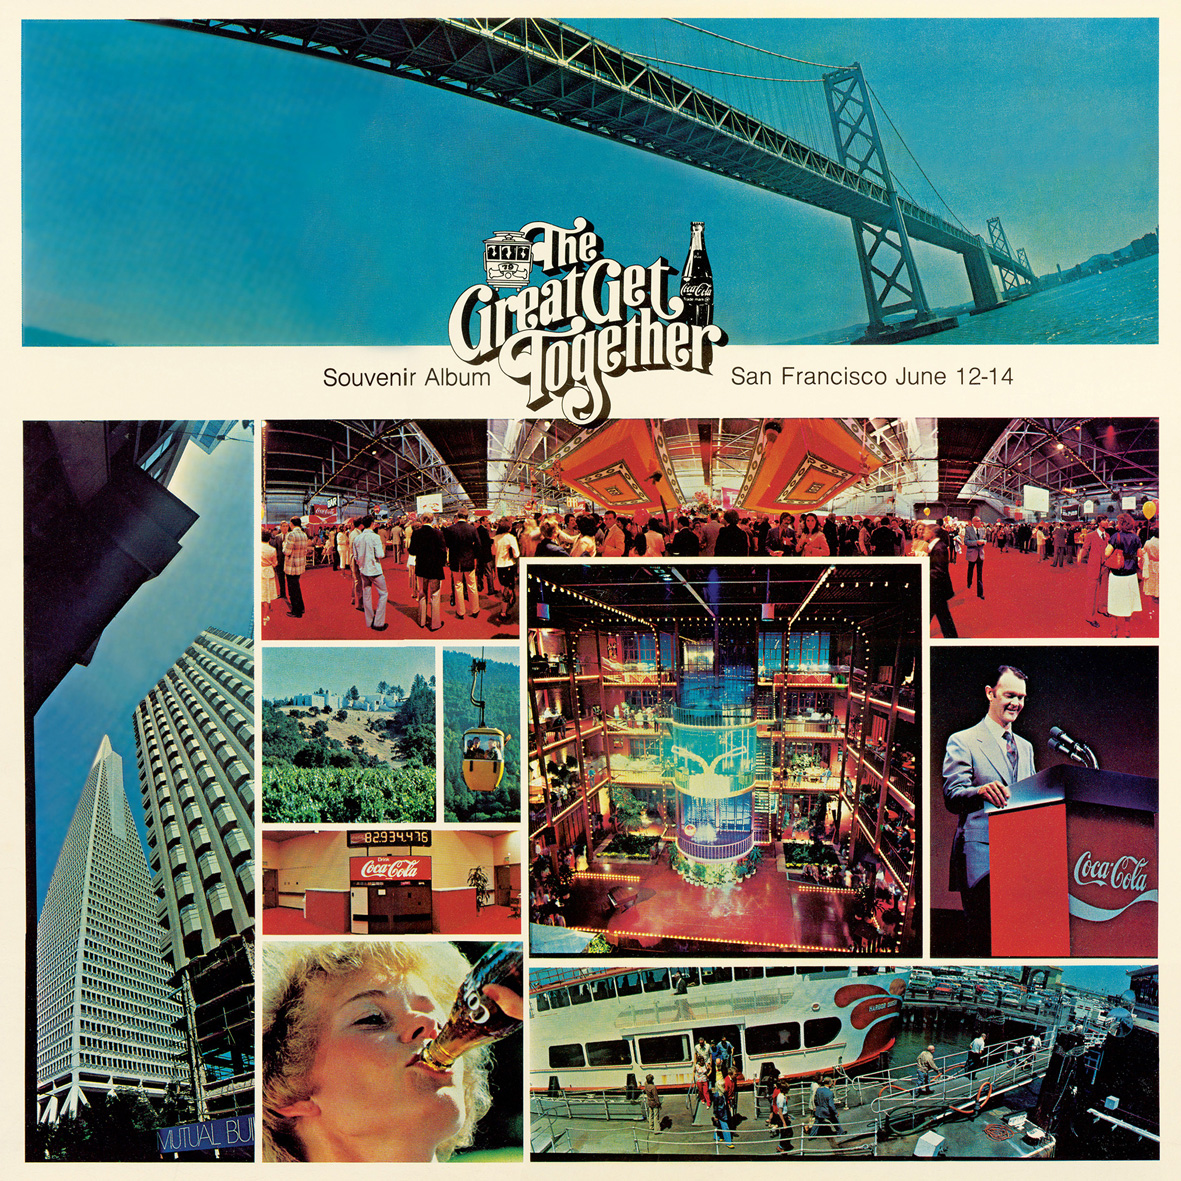 A 1979 album cover for a Coca-Cola show, titled “The Great Get Together.”